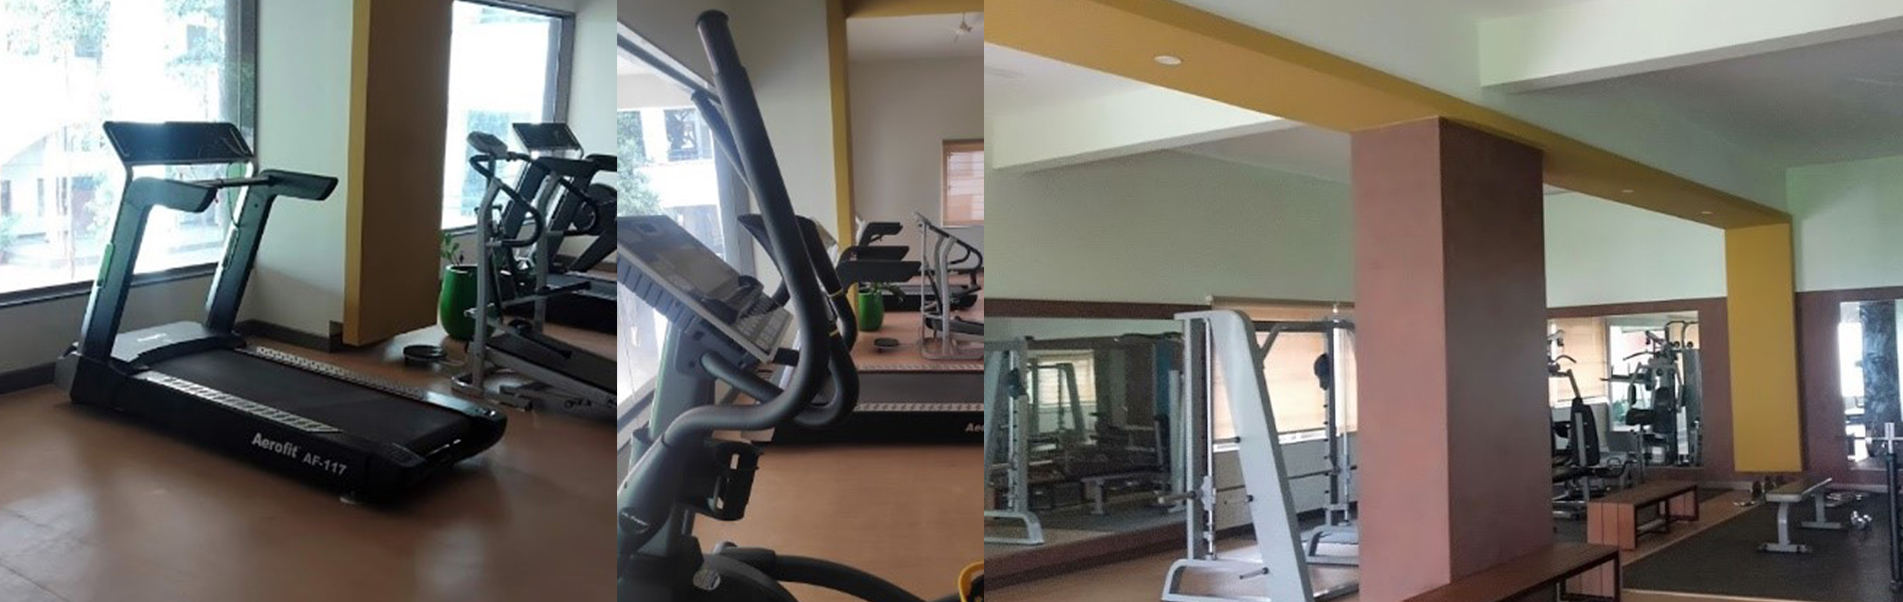 Magis Block 1st Floor  Well-equipped gym 